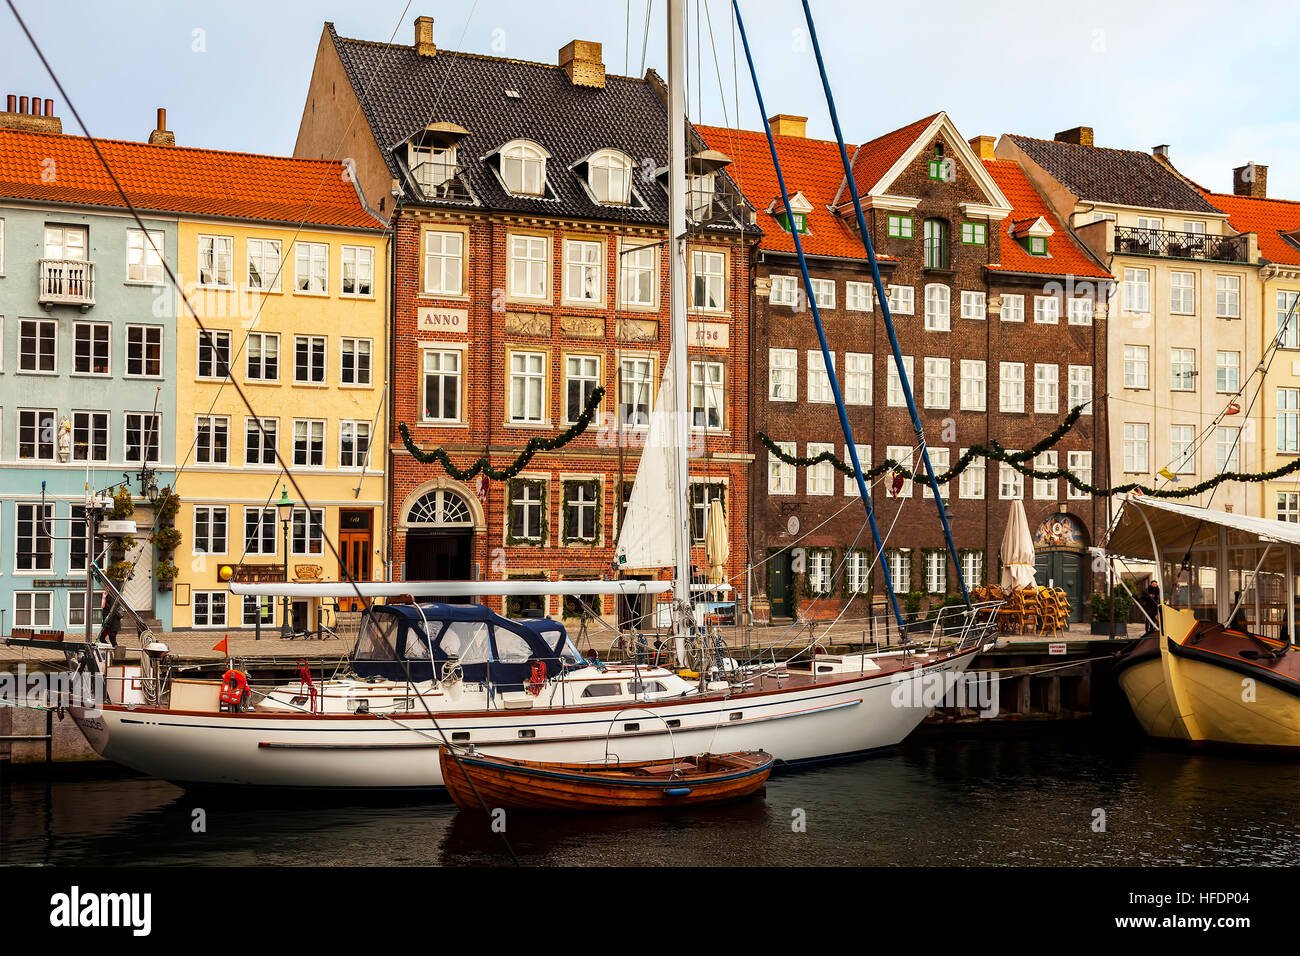 Ships and old buildings in the Nyhavn area of Copenhagen. Stock Photo